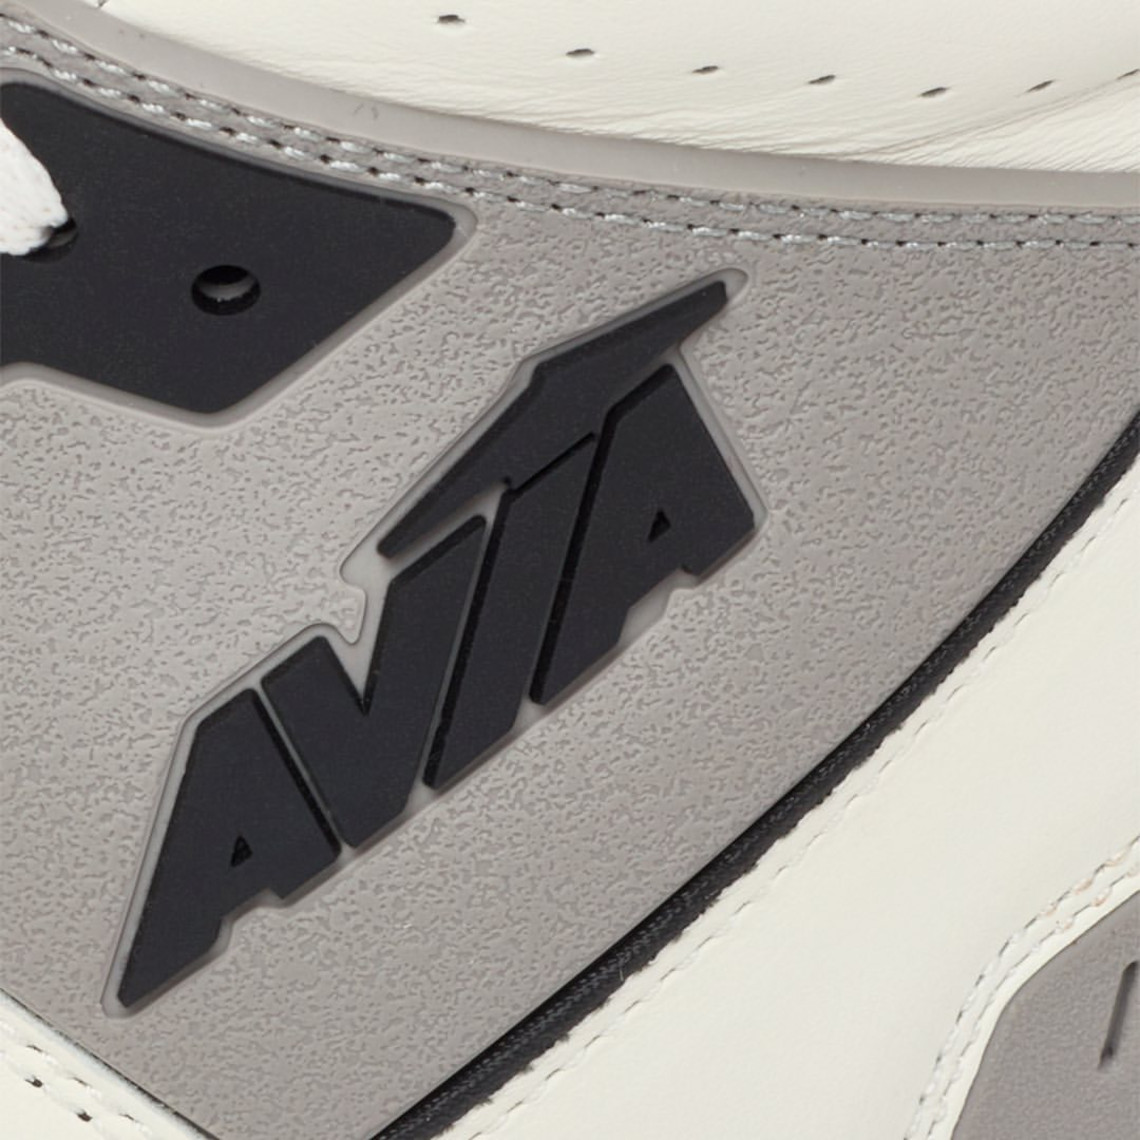 AVIA IS BACK With The 880 And 830 In Original Form | SneakerNews.com